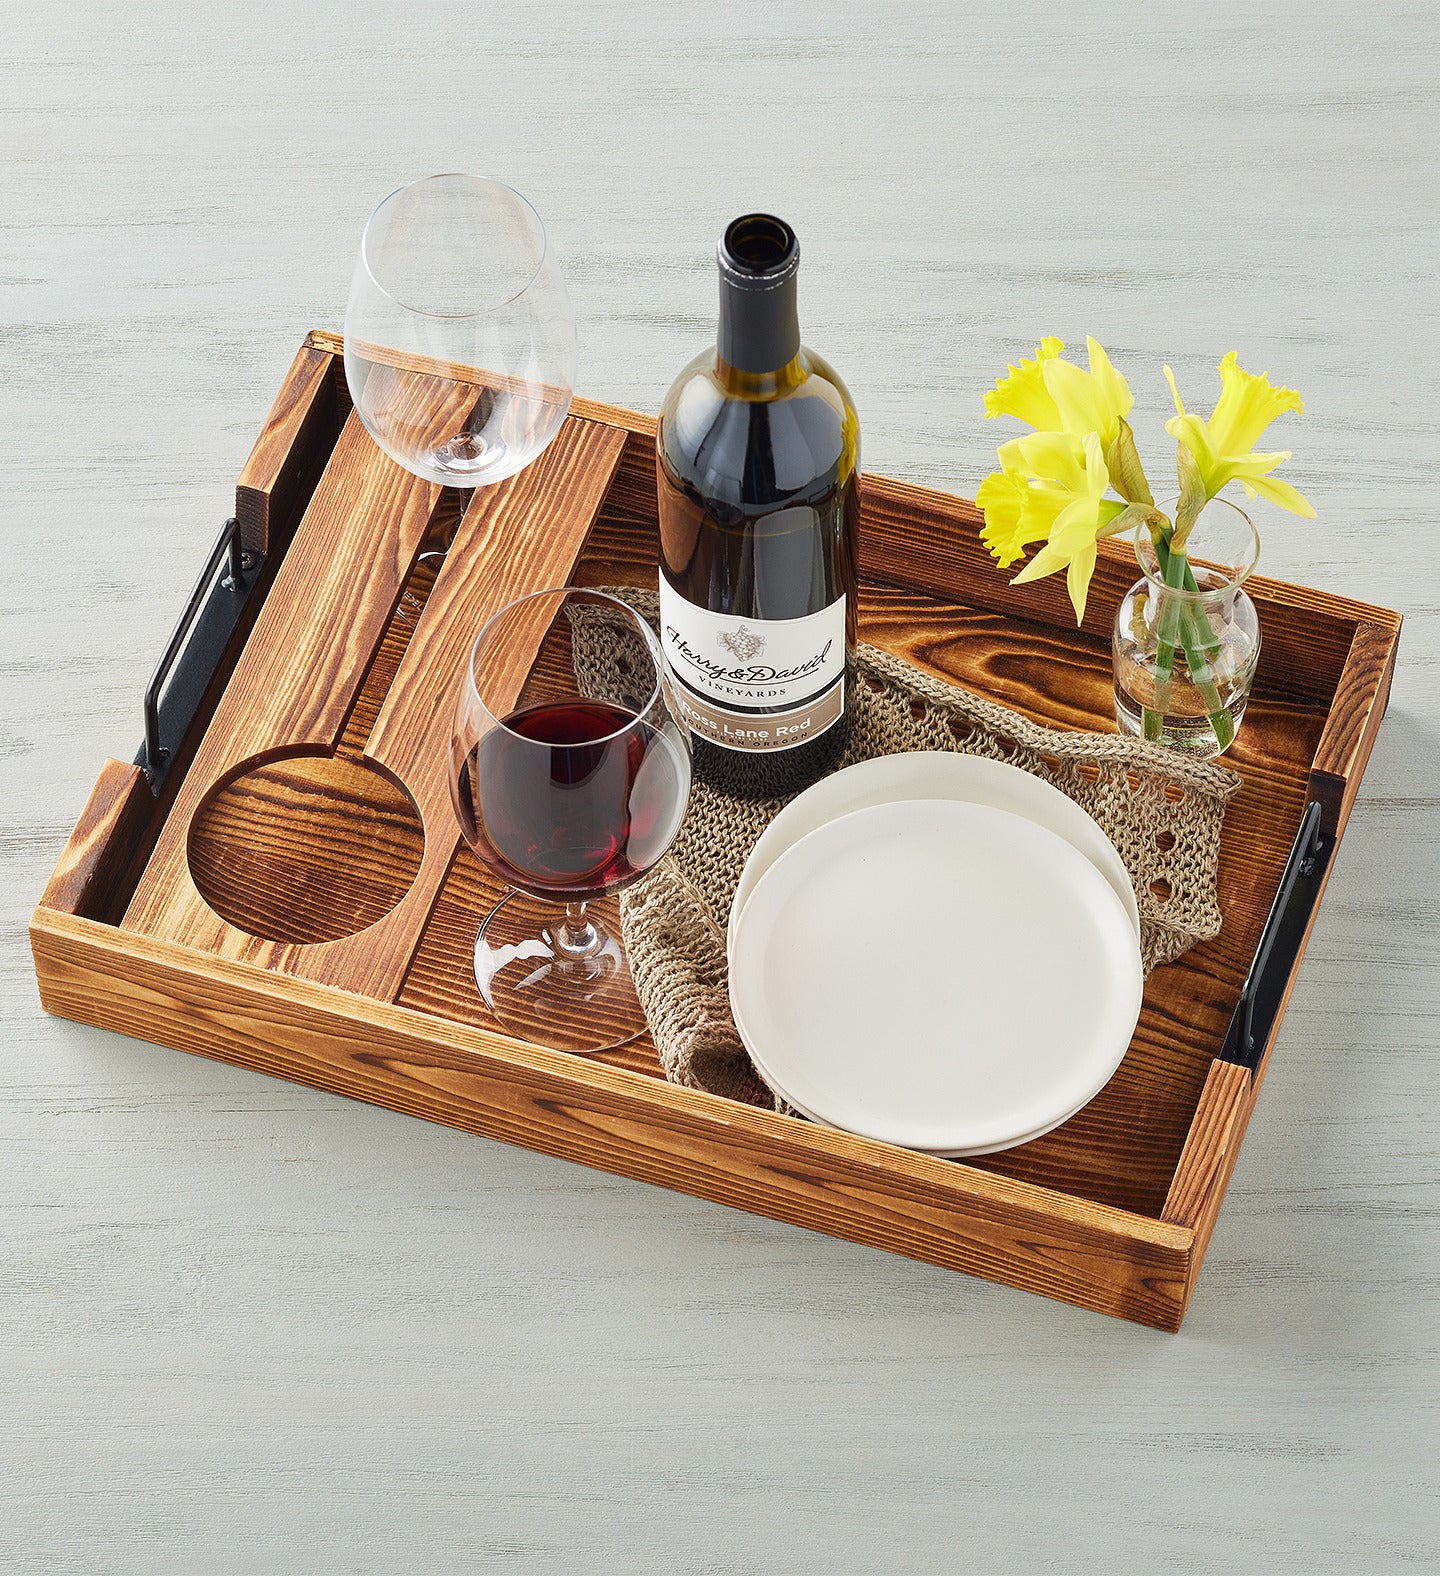 Wooden Leaf Tray - Decorative or Serving Tray